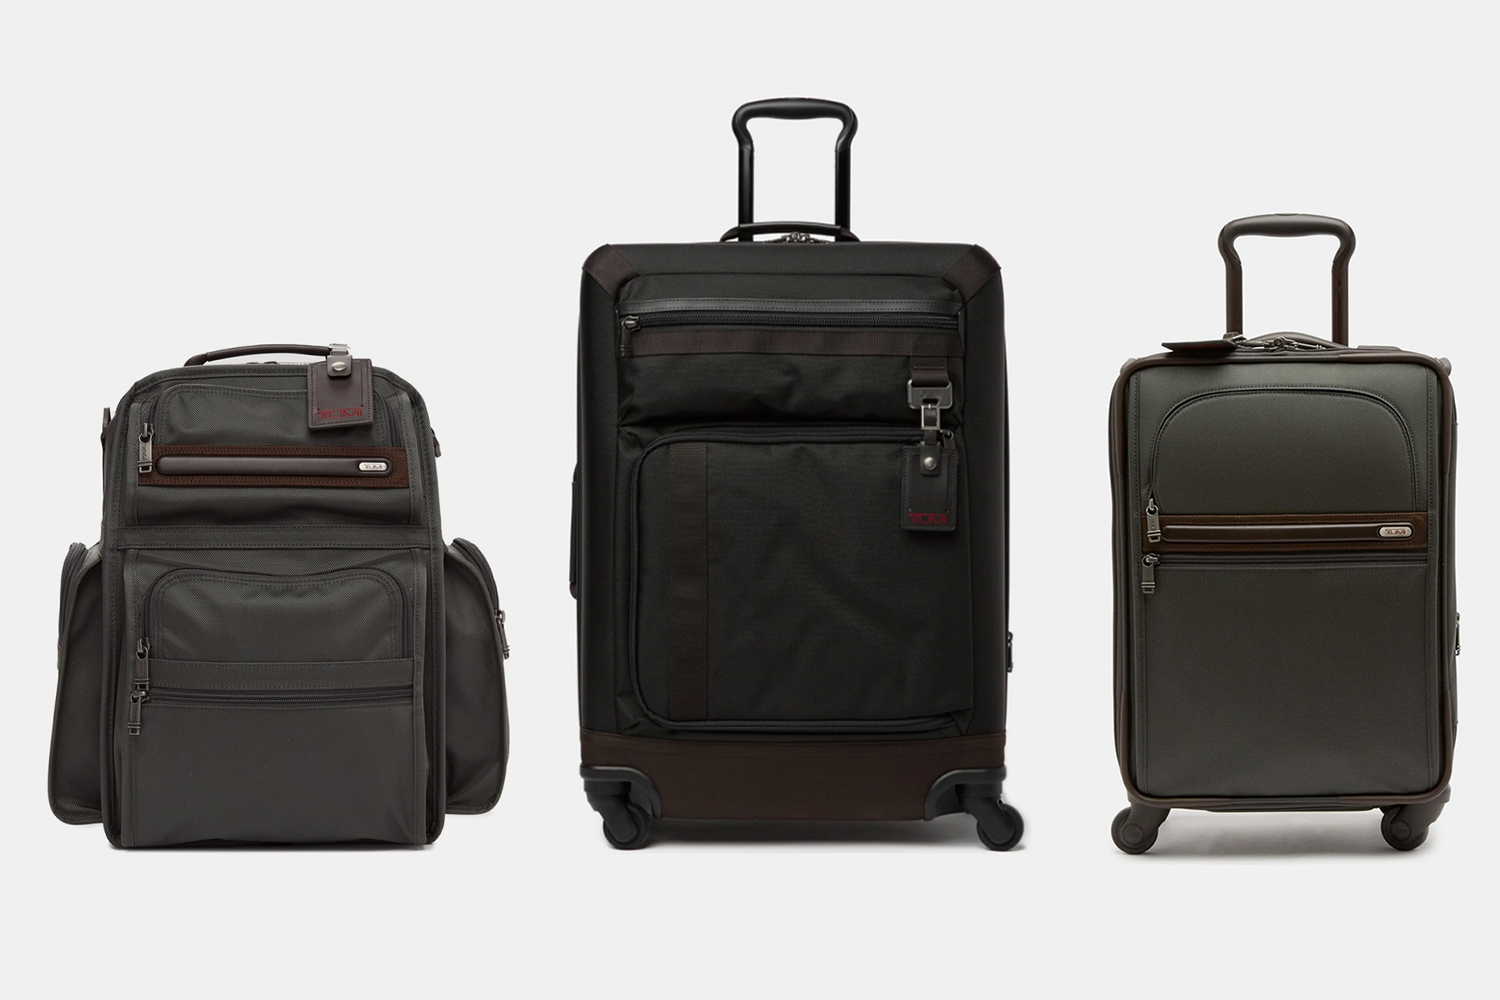 Take Up to 50% Off Tumi Luggage at Nordstrom Rack - InsideHook